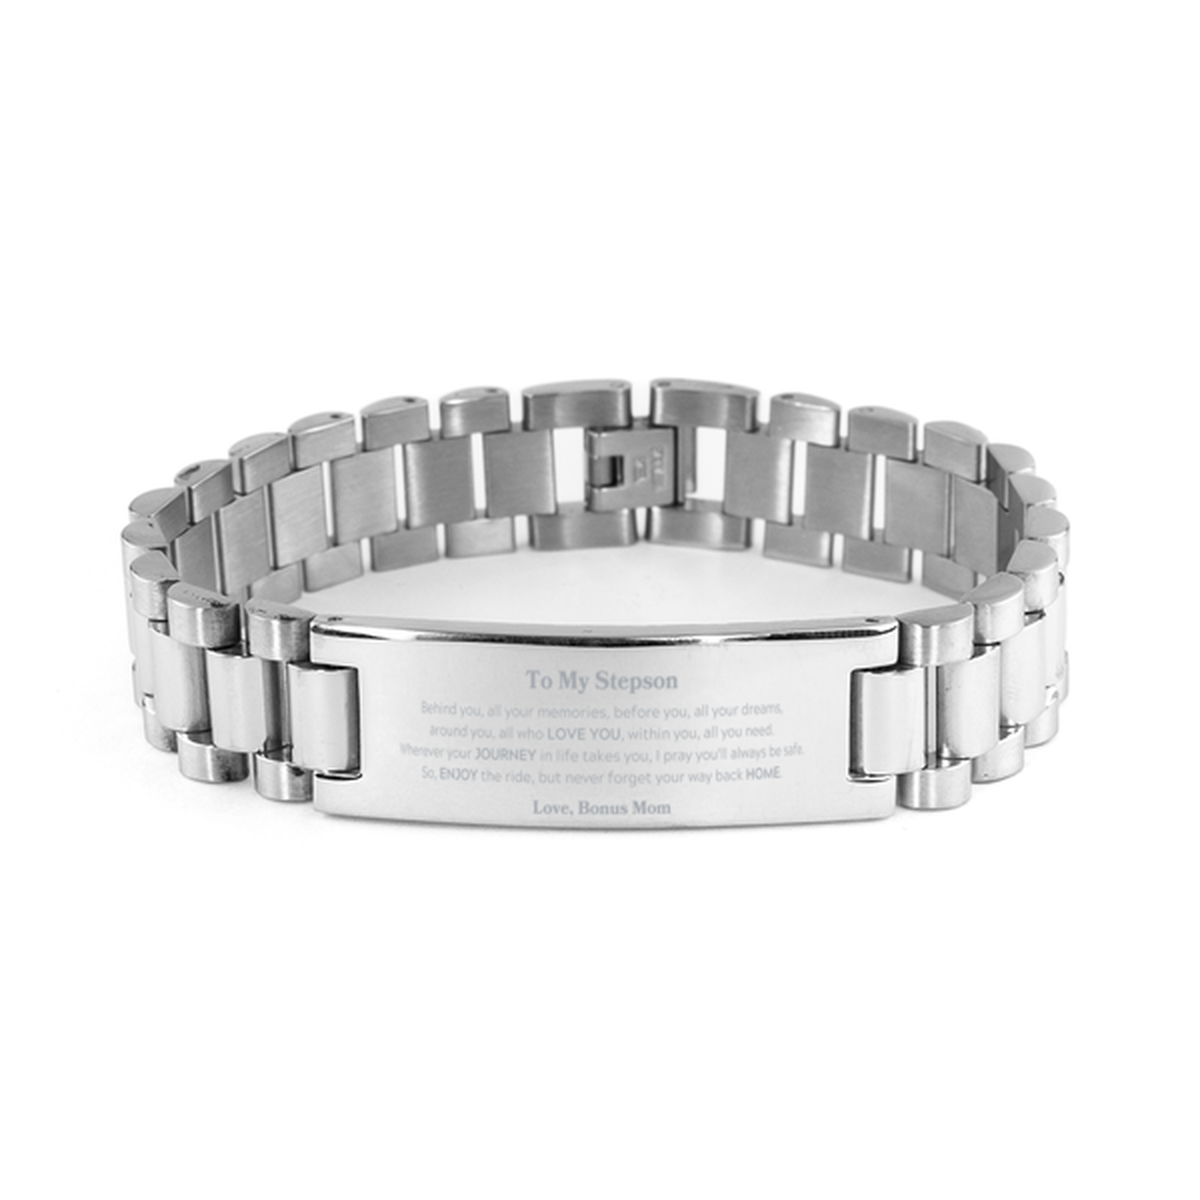 To My Stepson Graduation Gifts from Bonus Mom, Stepson Ladder Stainless Steel Bracelet Christmas Birthday Gifts for Stepson Behind you, all your memories, before you, all your dreams. Love, Bonus Mom